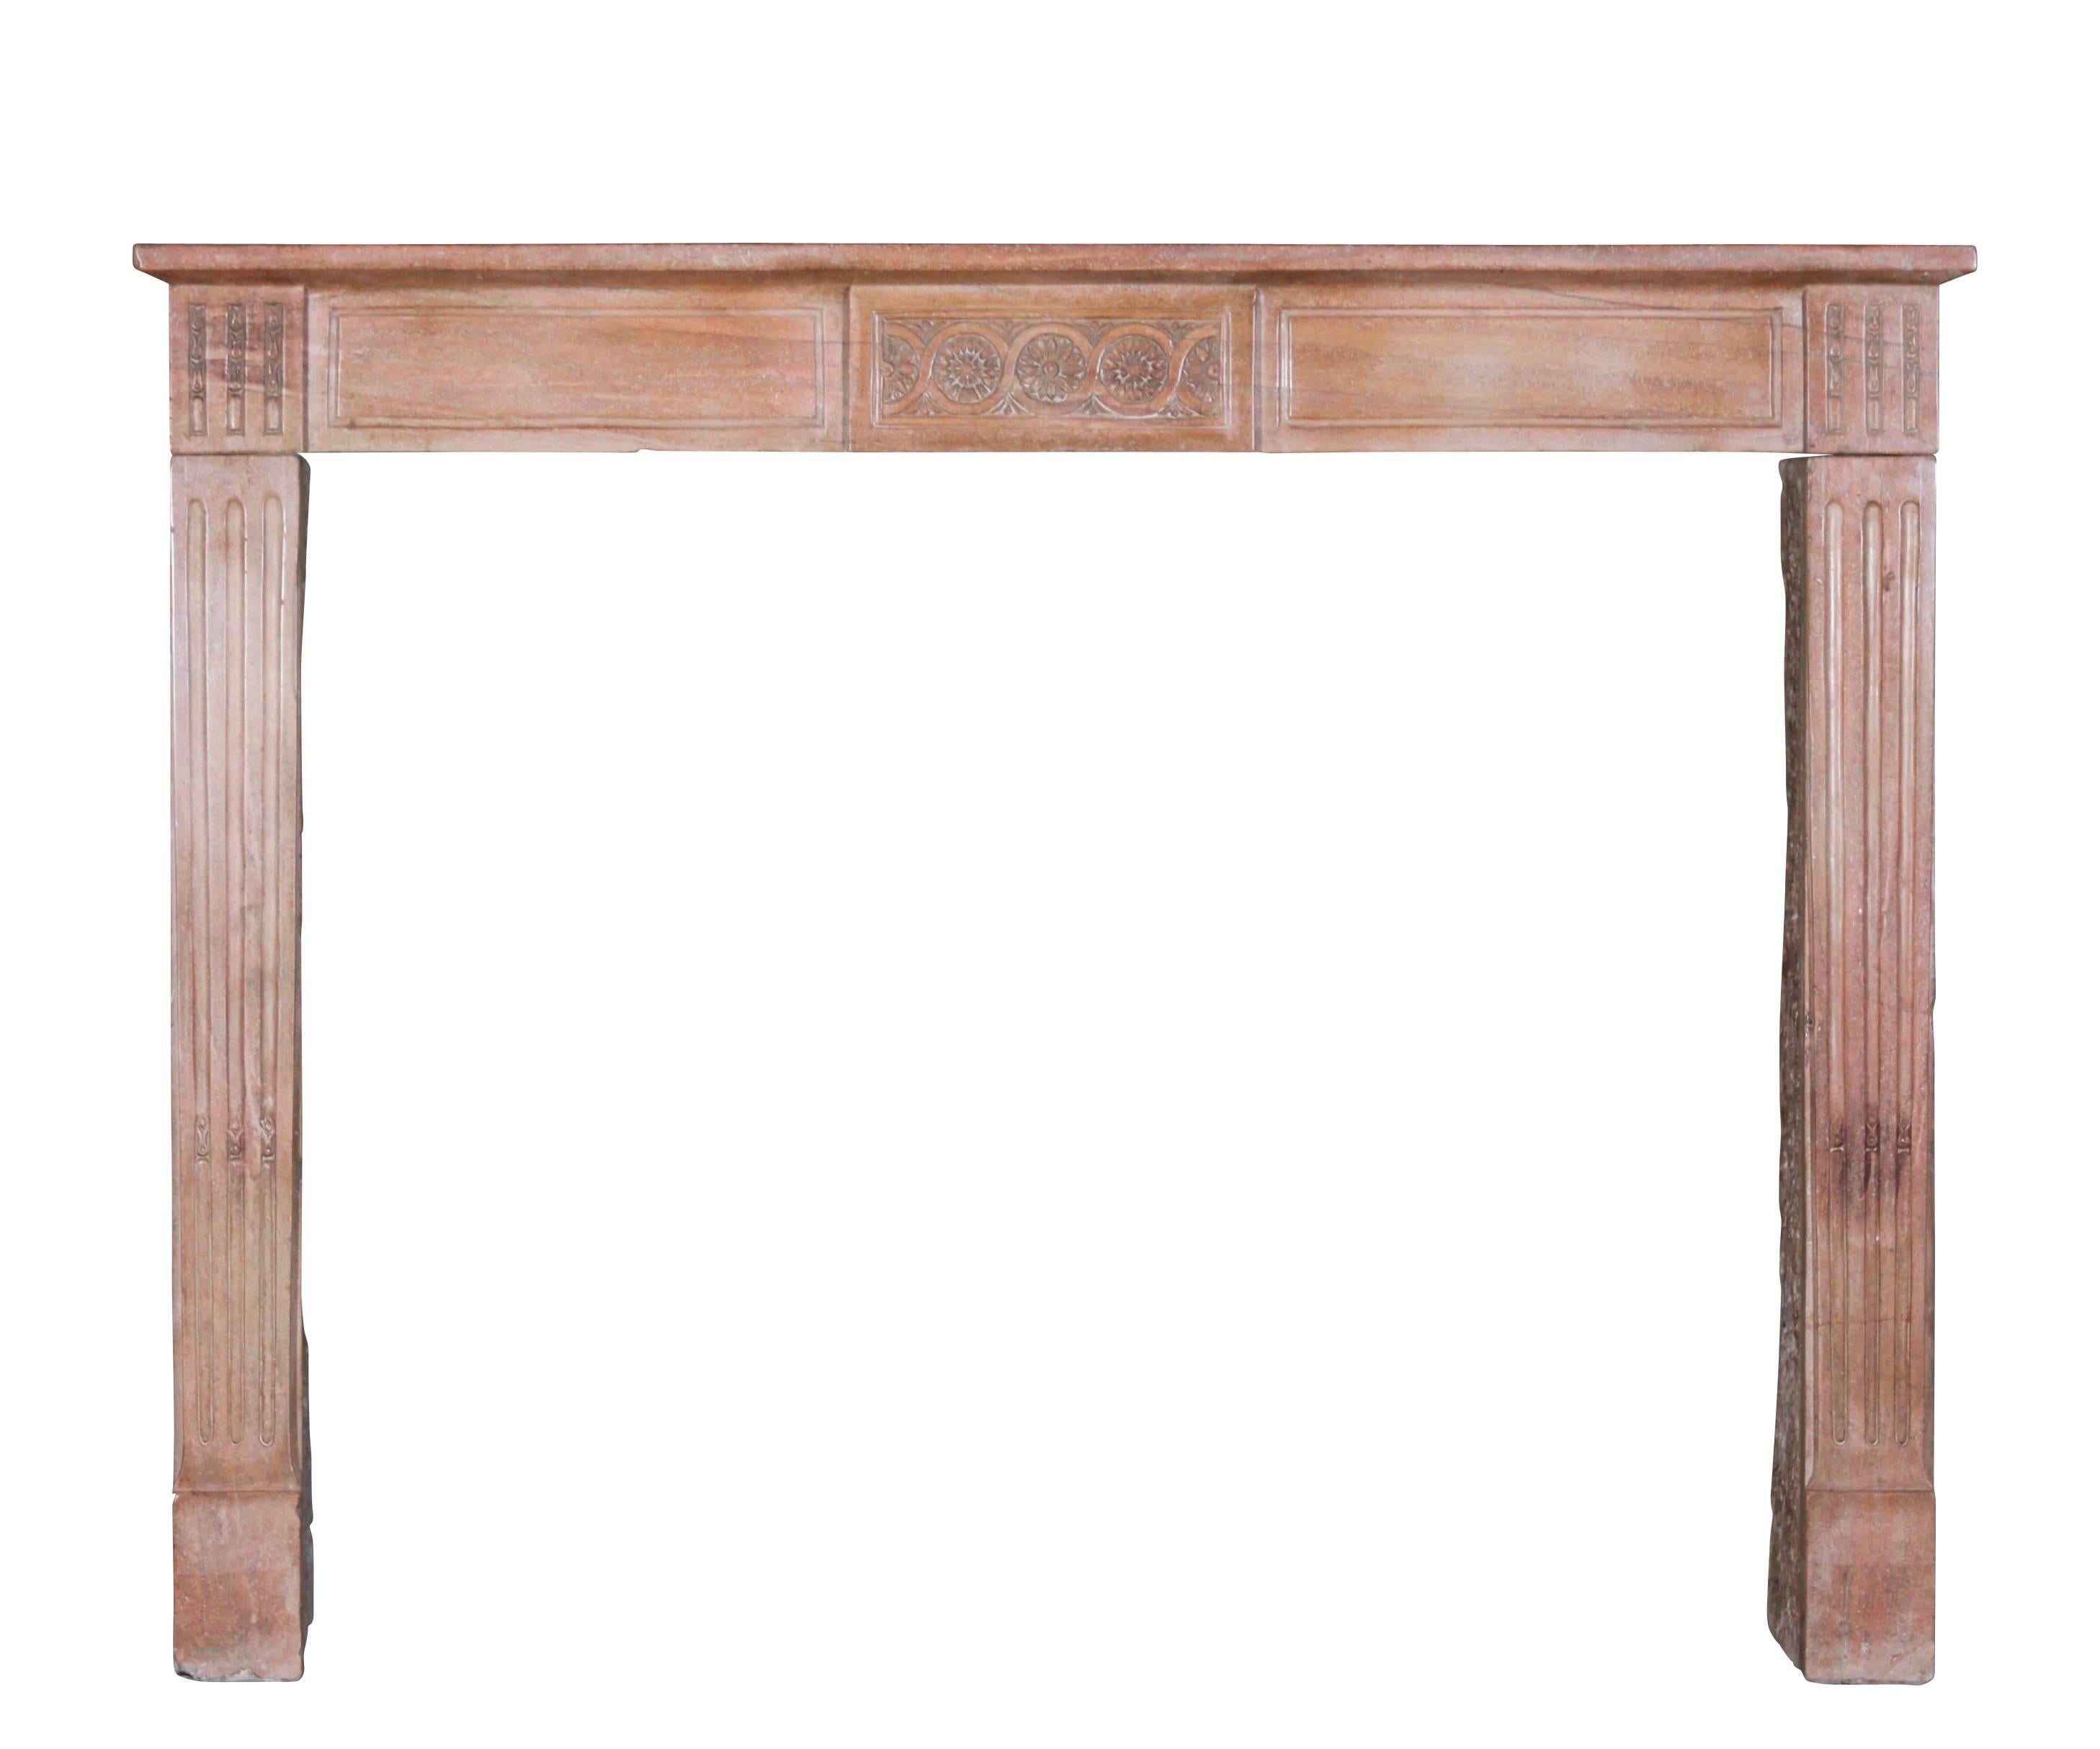 18th Century Antique Fireplace Mantel For Sale